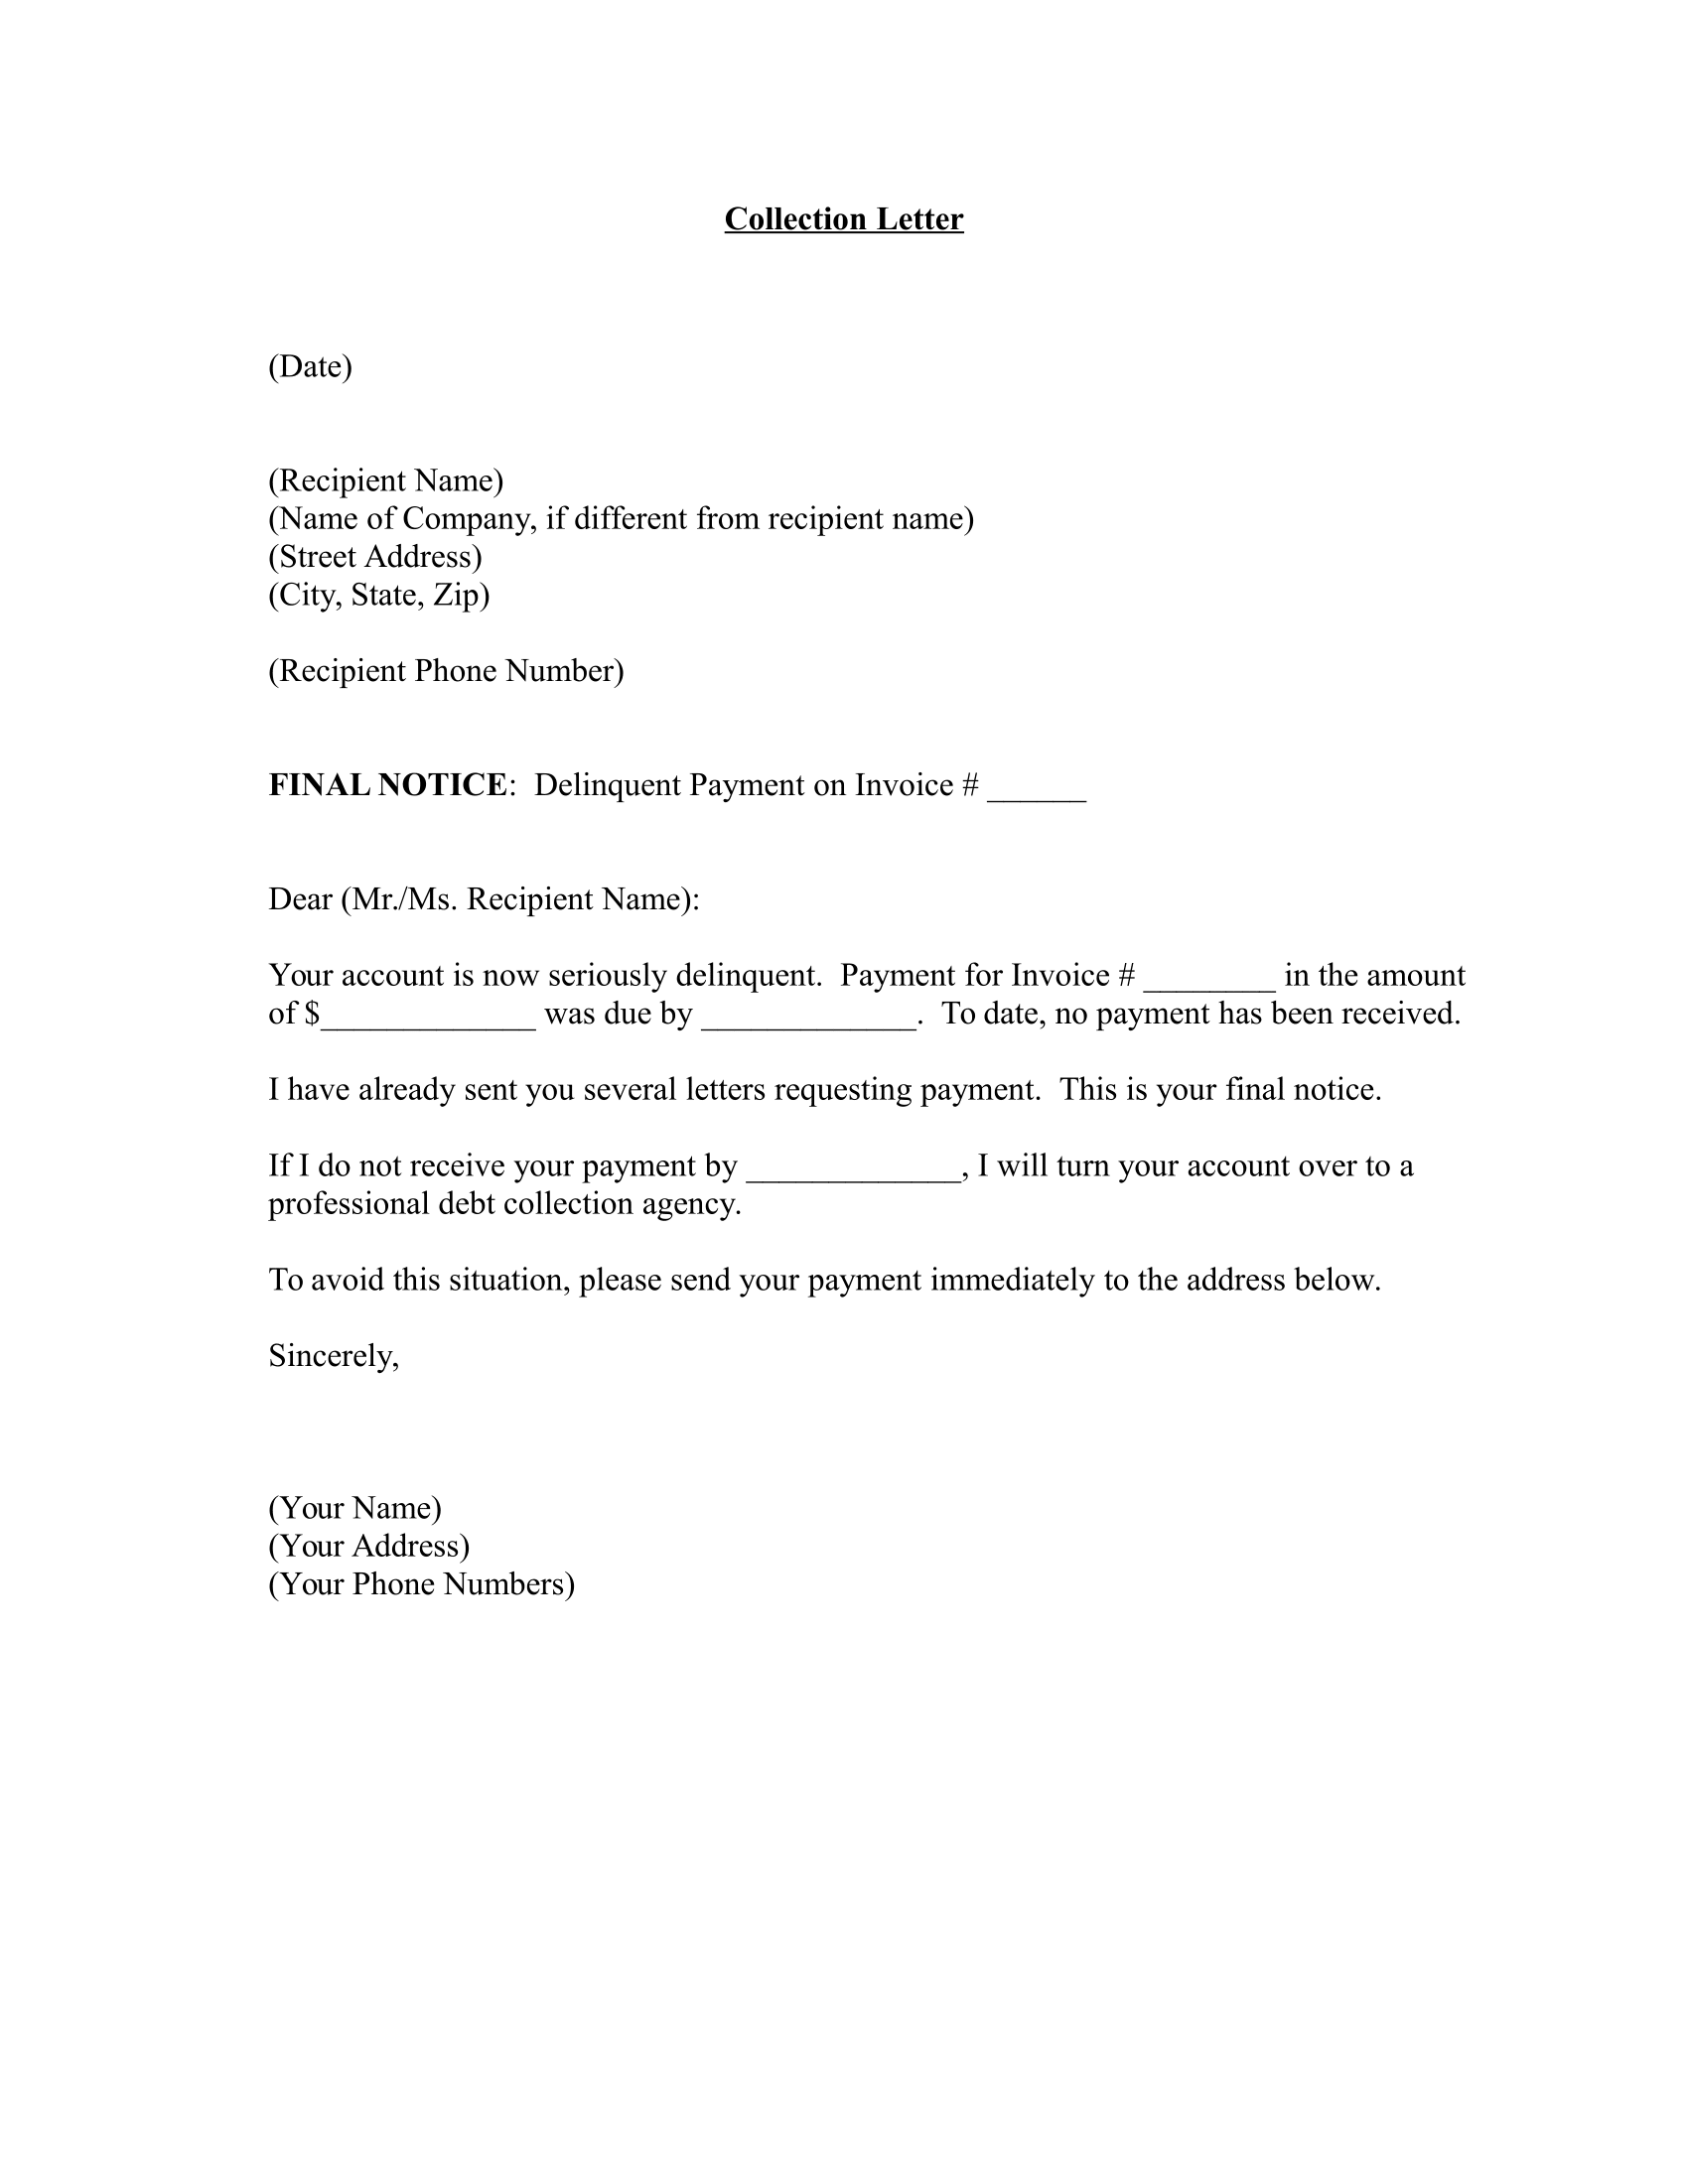 Sample Of Collection Letter For Payment from officewriting.com